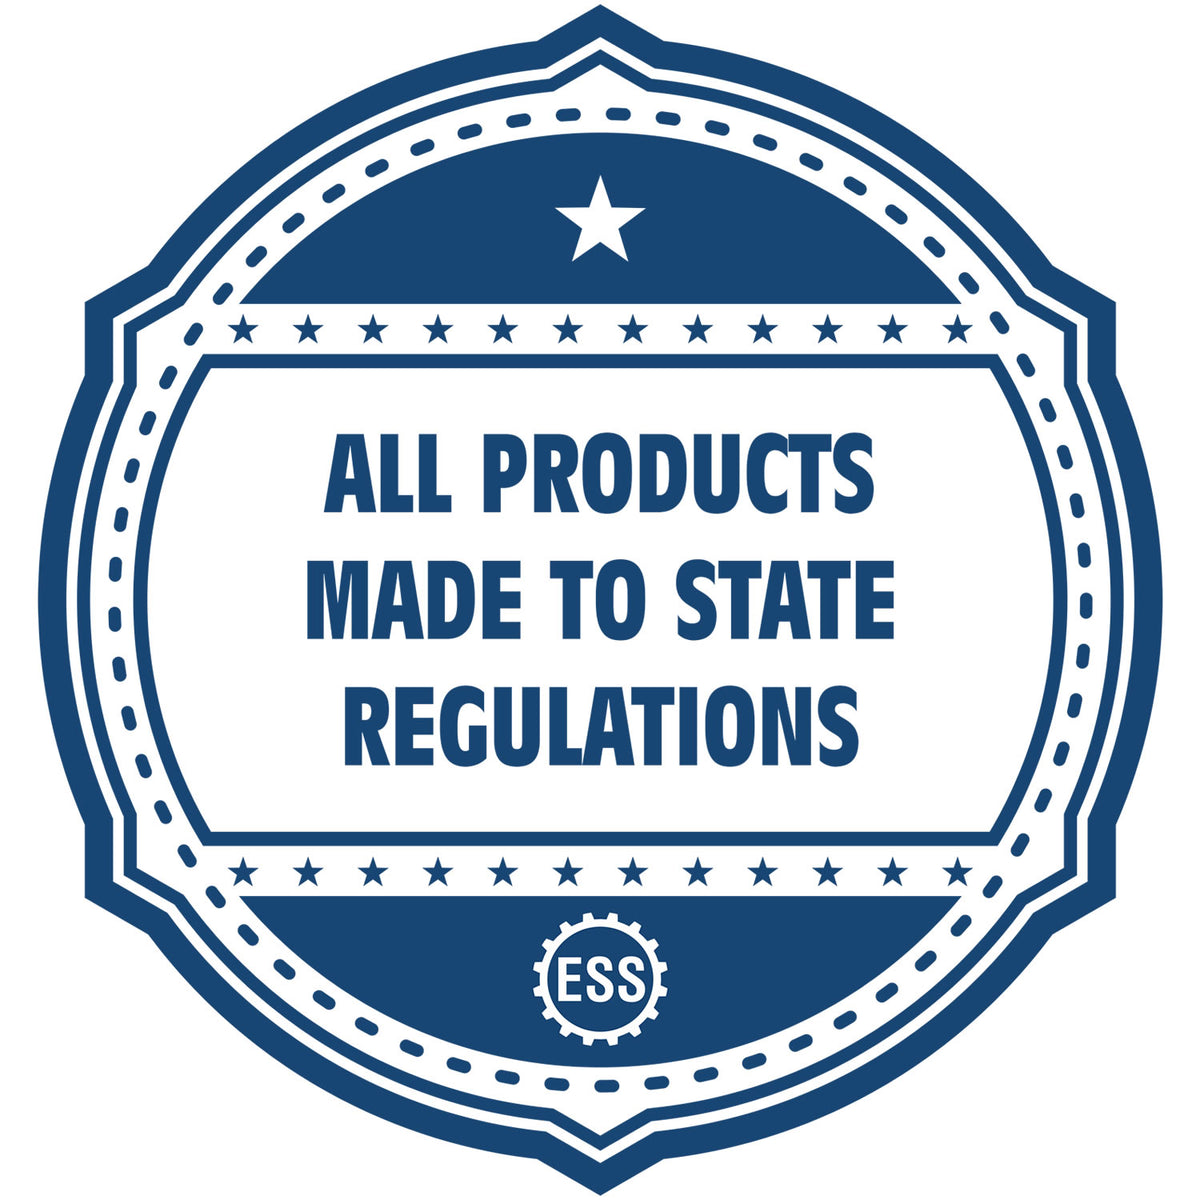 A blue icon or badge for the Hybrid New York Architect Seal showing that this product is made in compliance with state regulations.